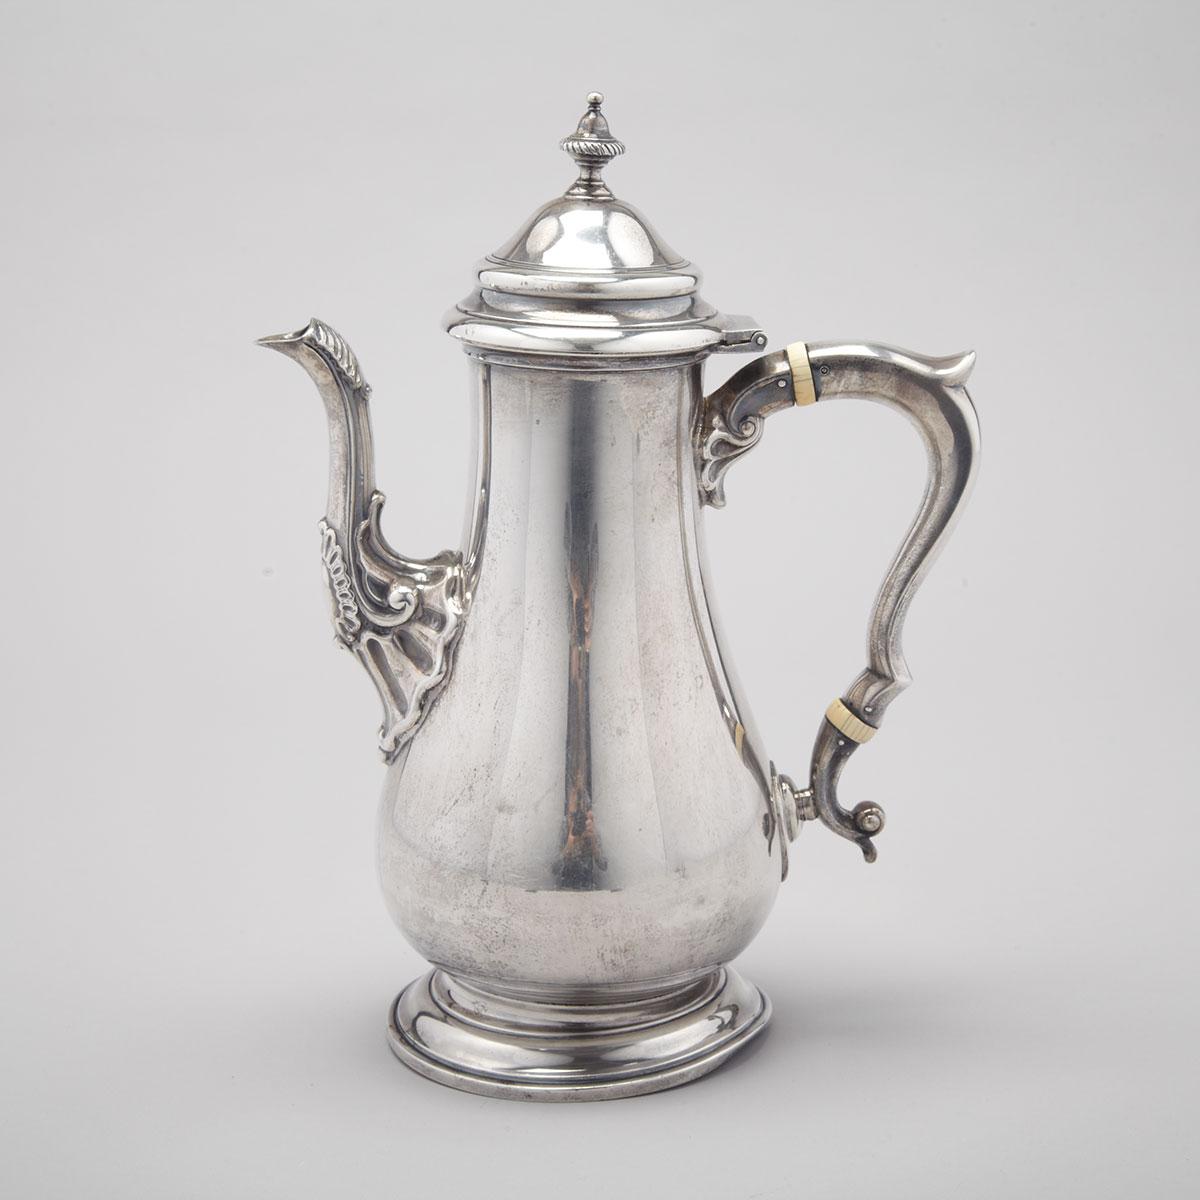 Canadian Silver Baluster Coffee Pot, Henry Birks & Sons, Montreal, Que., 1968